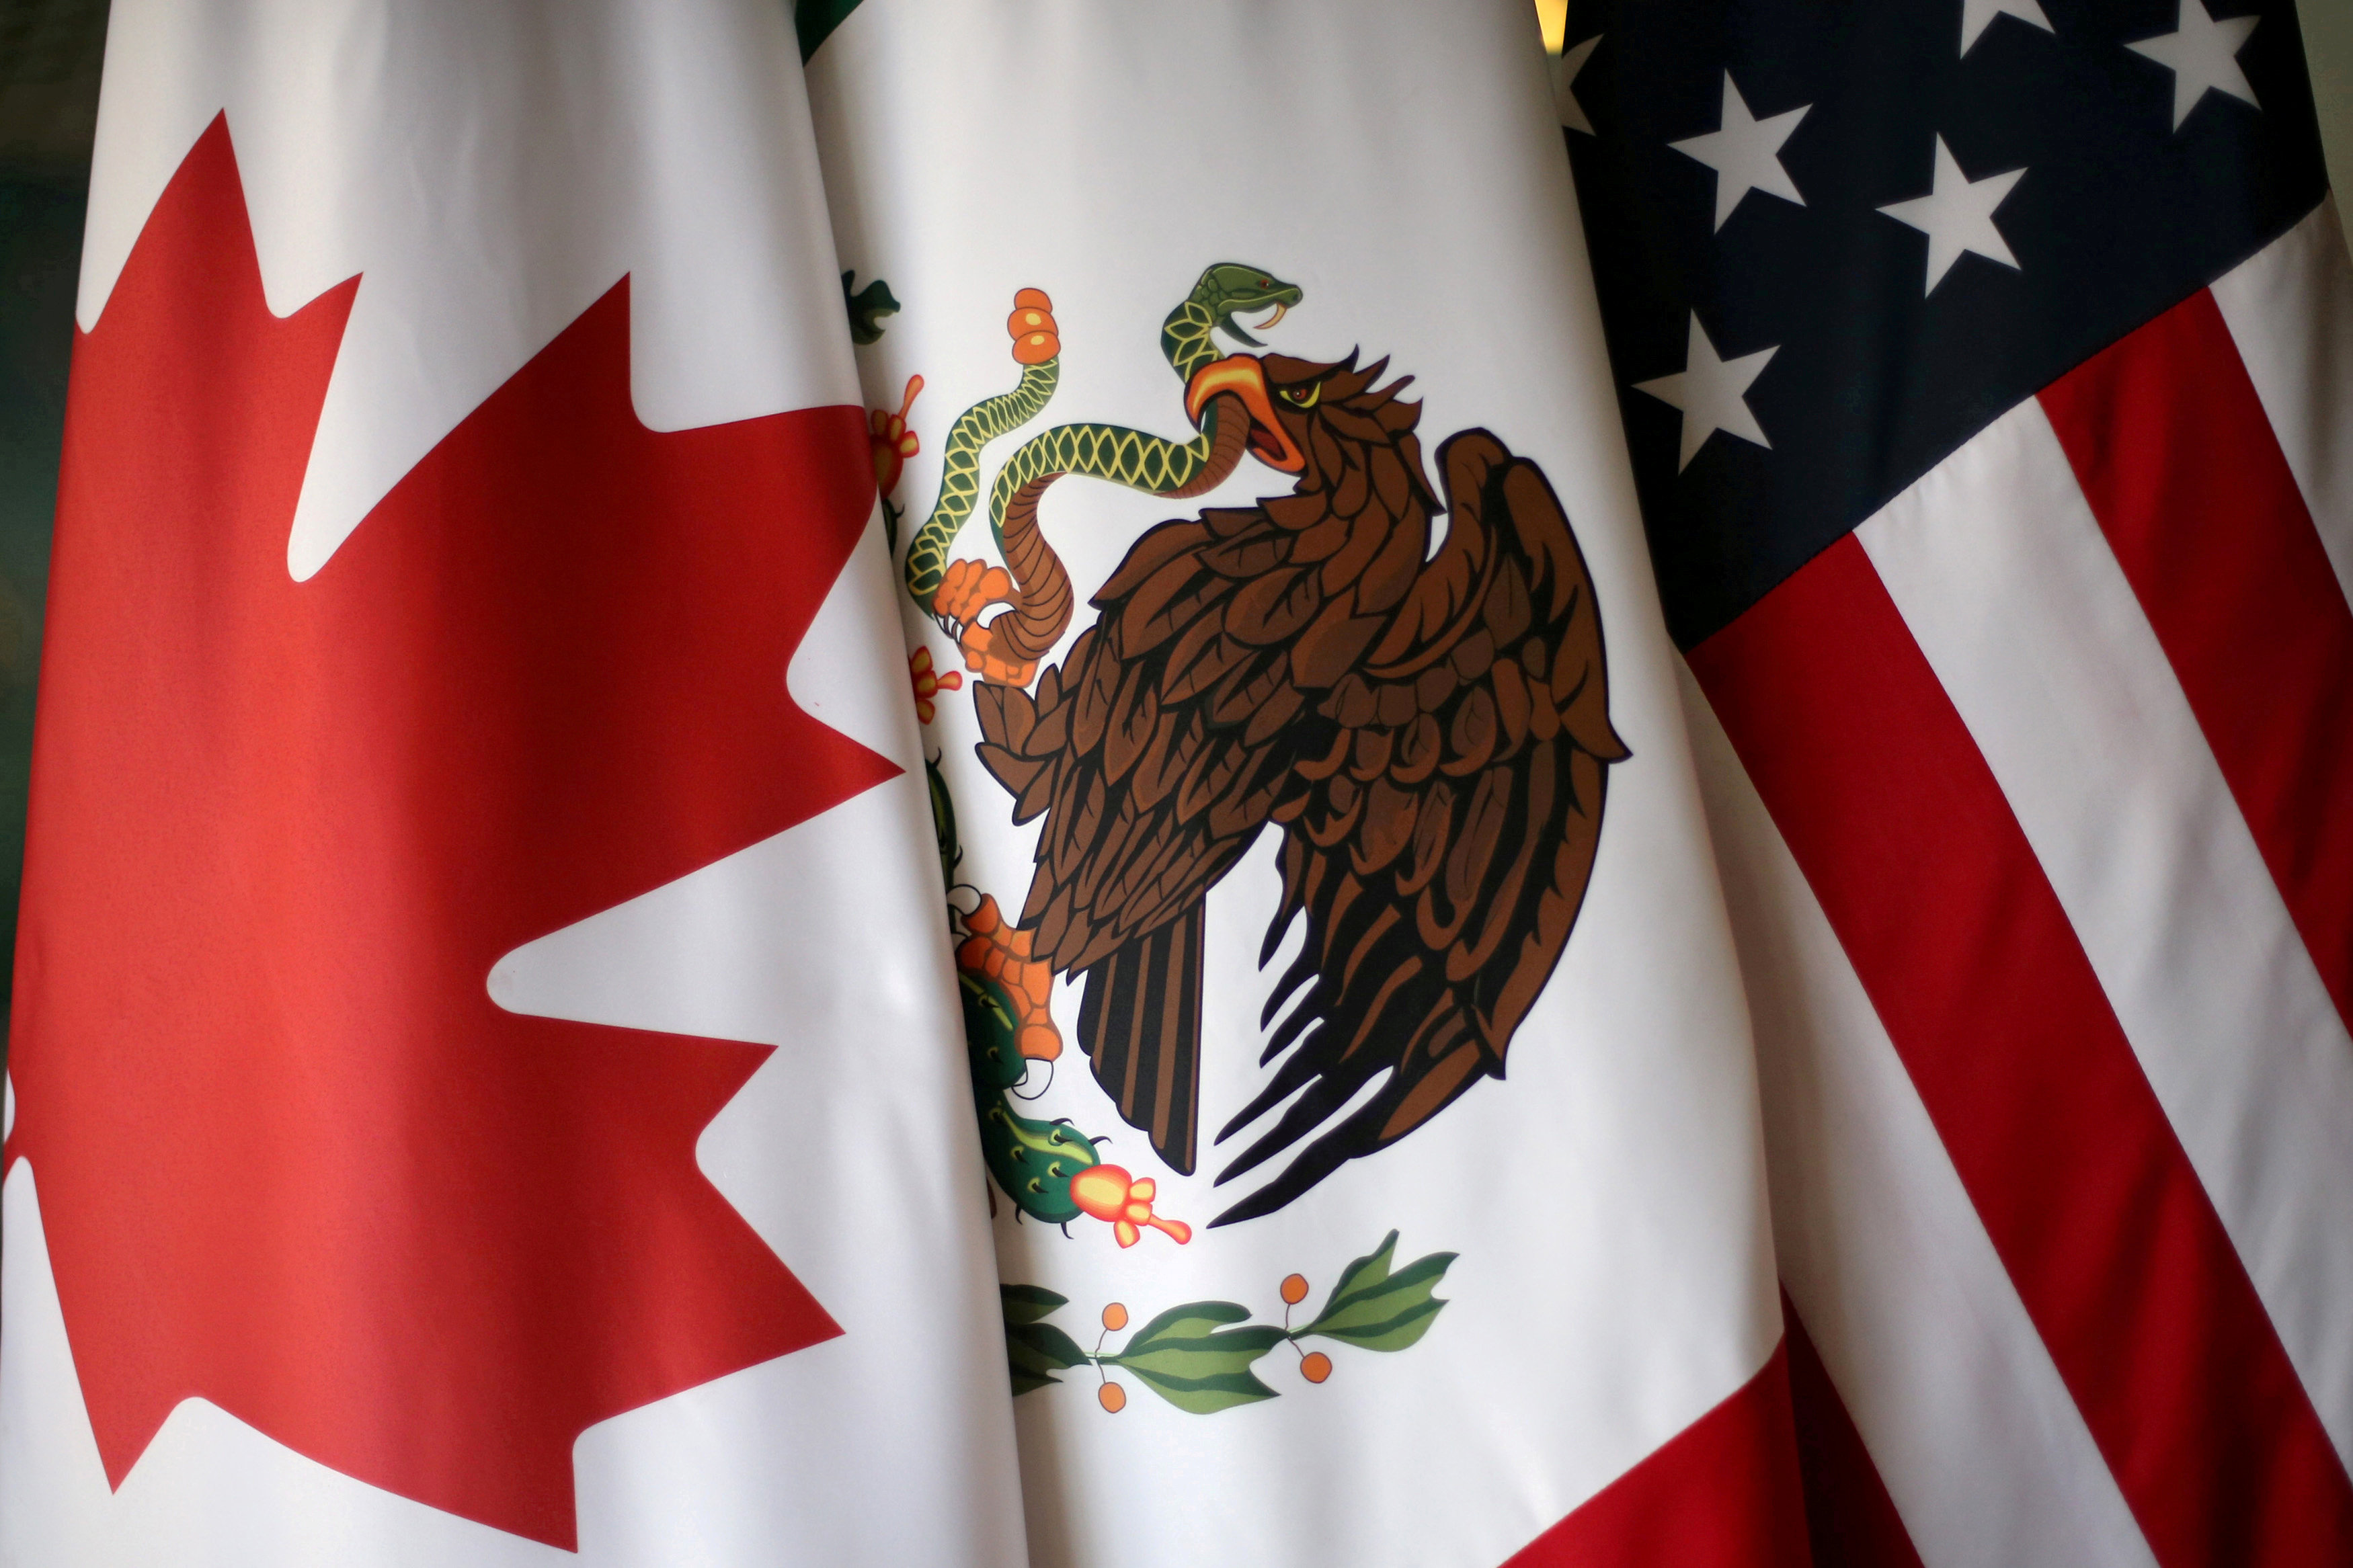 New NAFTA talks aim to clear pathway to toughest issues